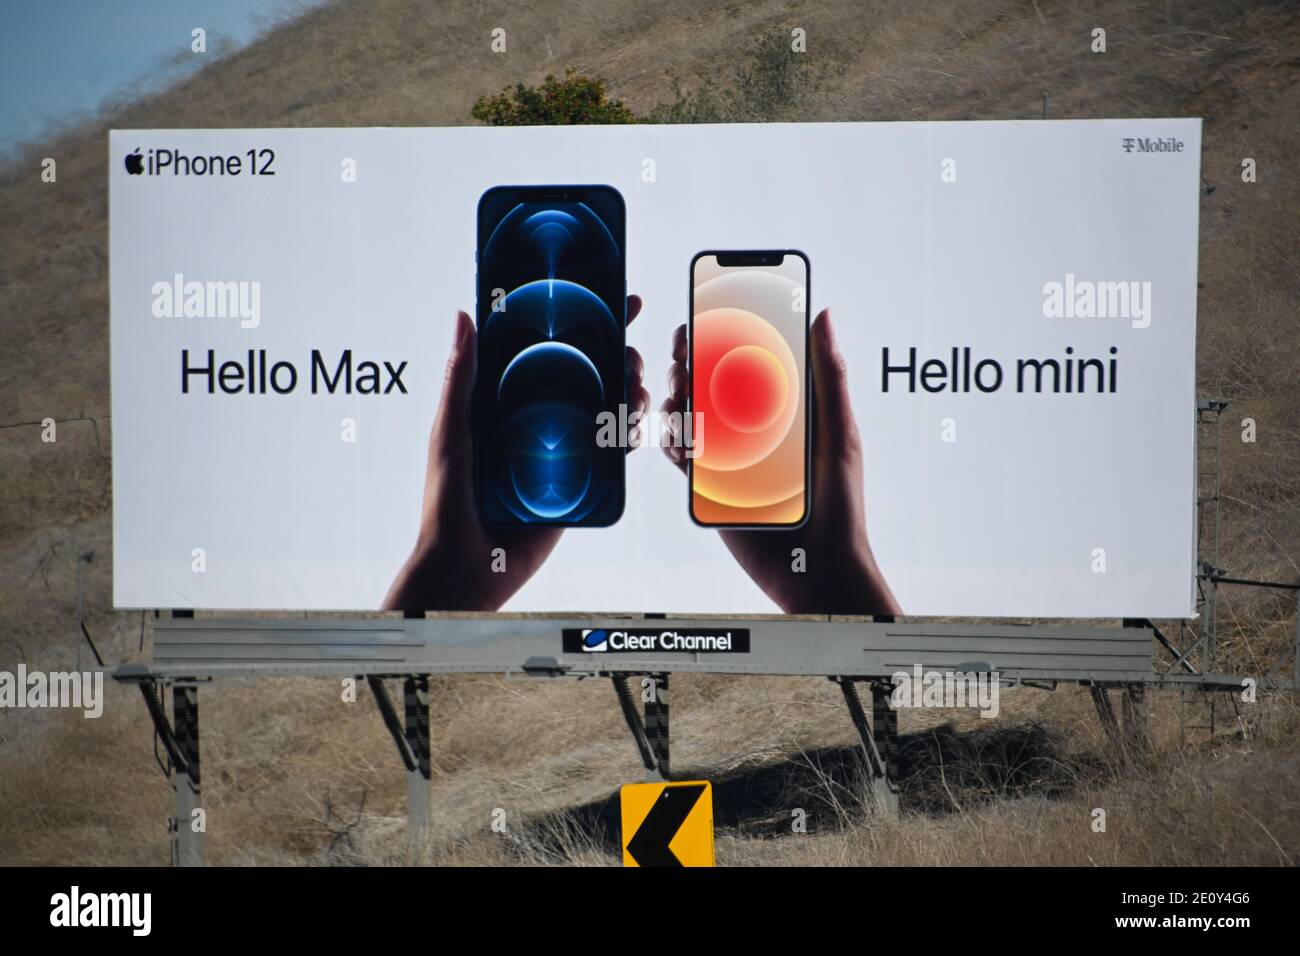 Apple iPhone 12 billboards are seen on La Brea Ave, Wednesday, Dec. 30, 2020 in Inglewood, Calif. (Dylan Stewart/Image of Sport) Stock Photo